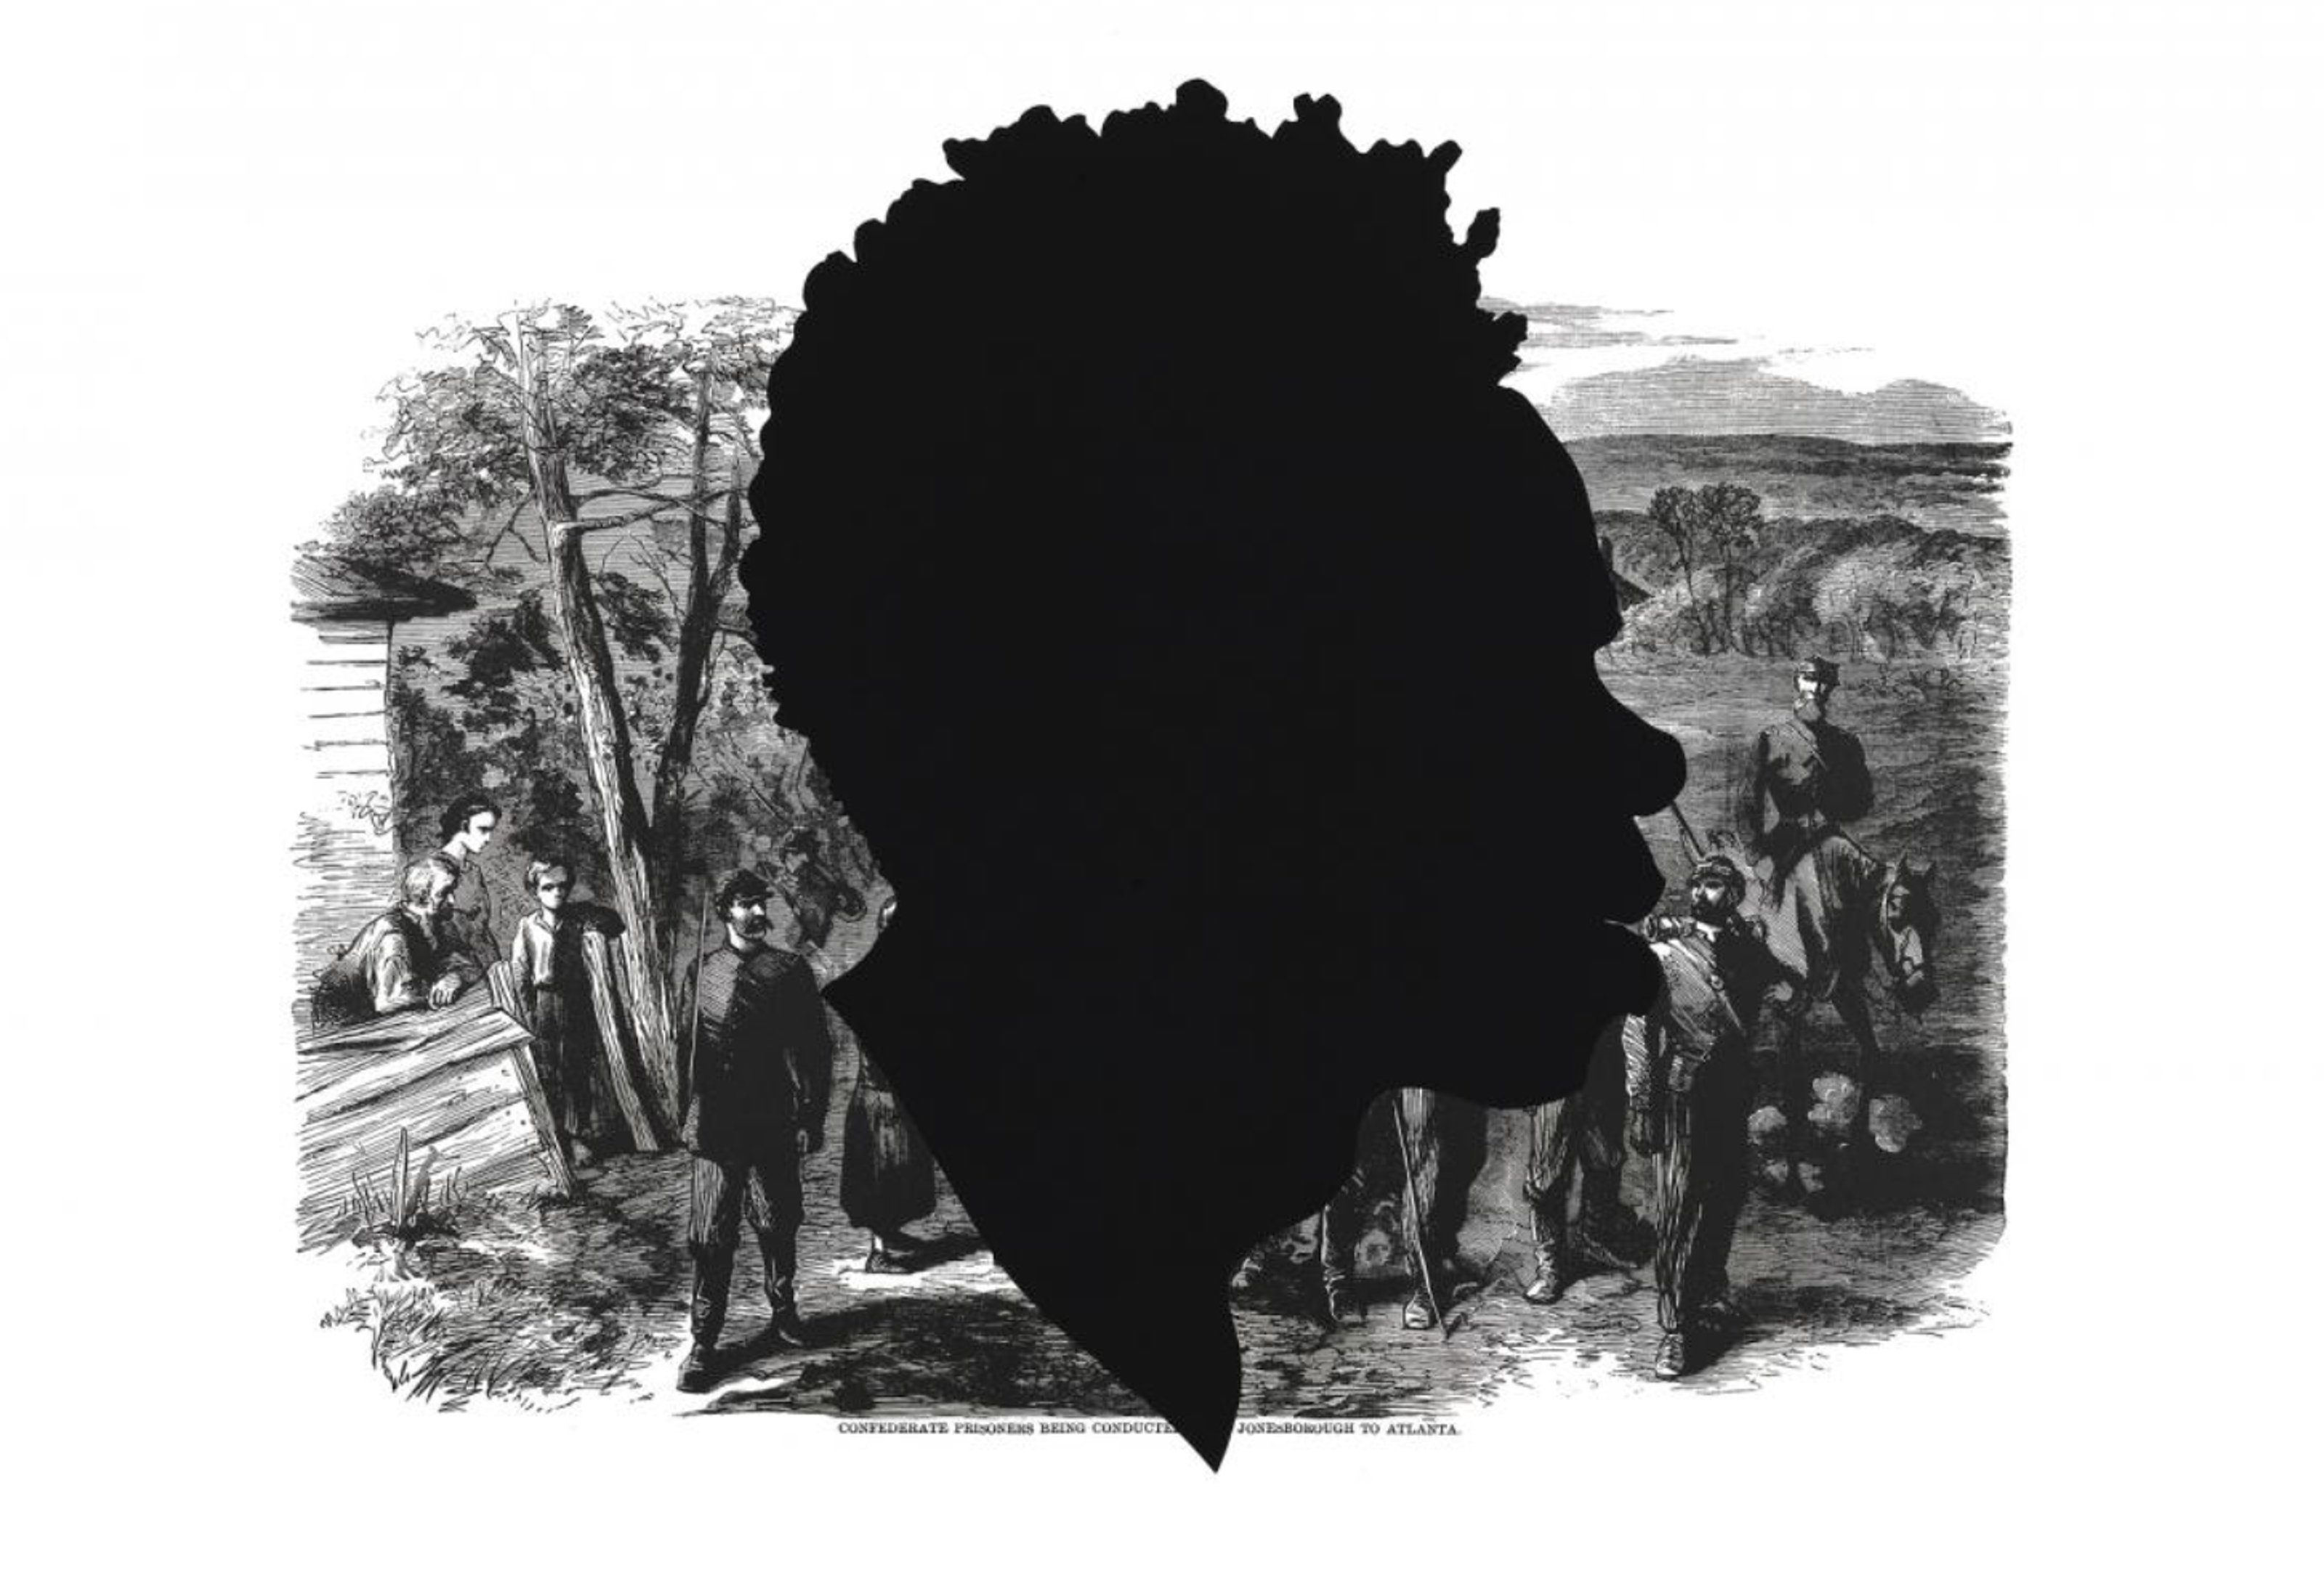 Kara Walker - Confederate Prisoners Being Conducted from Jonesborough to Atlanta, from the portfolio Harper's Pictorial History of the Civil War (Annotated), 2005